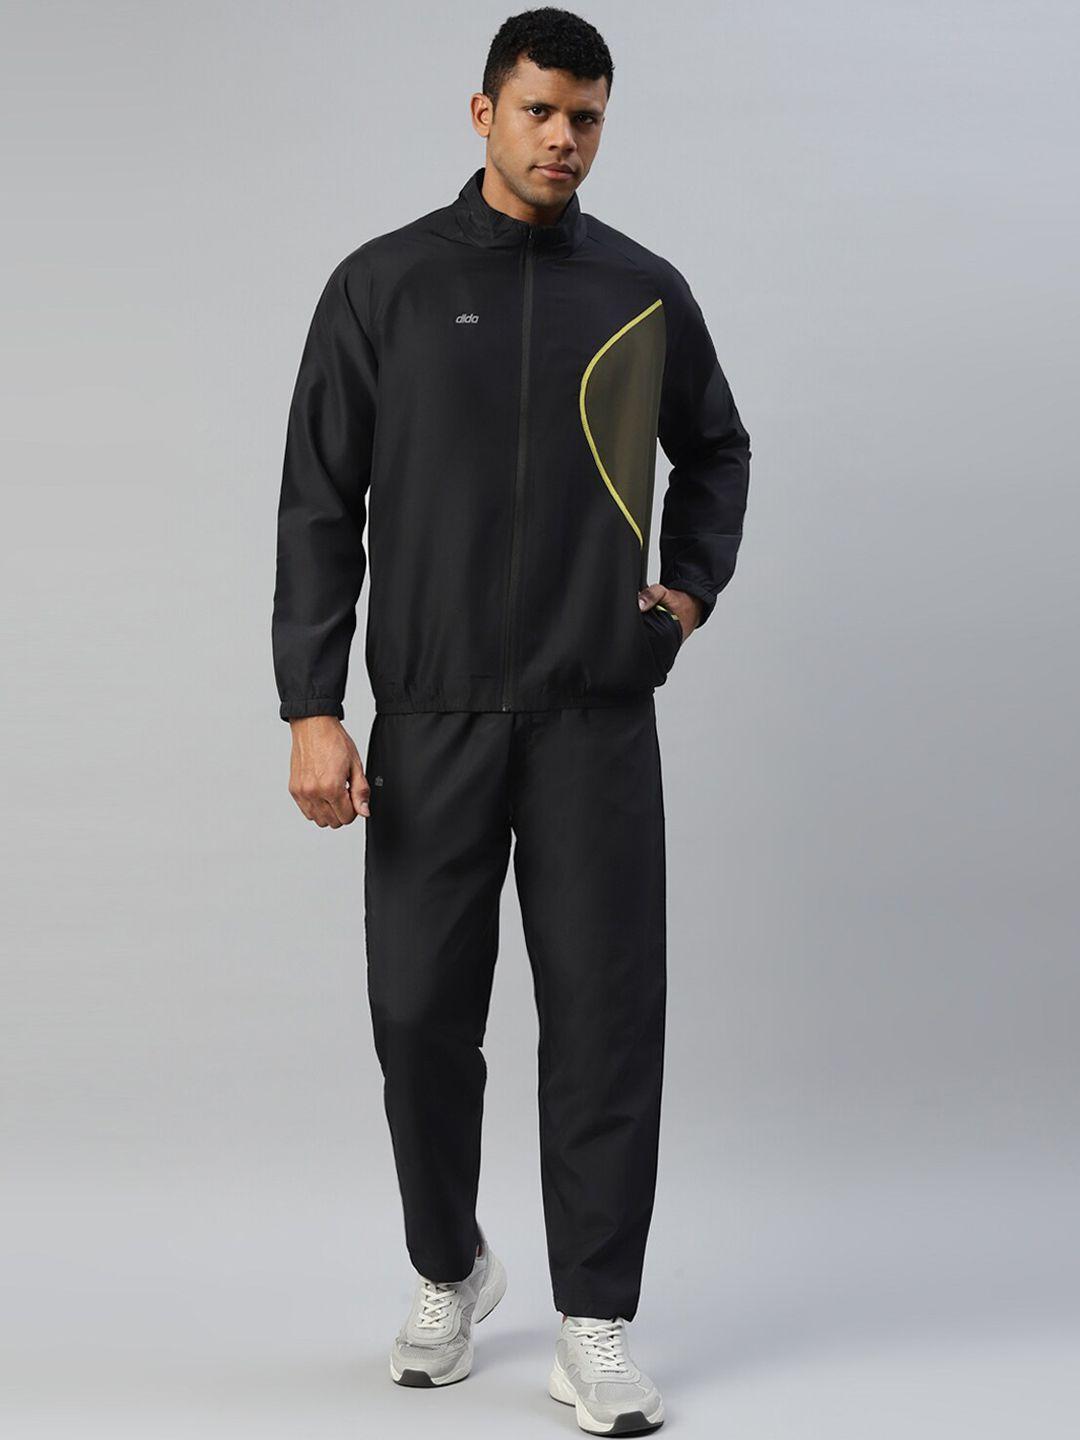 dida comfort-fit mock collar jacket with track pant